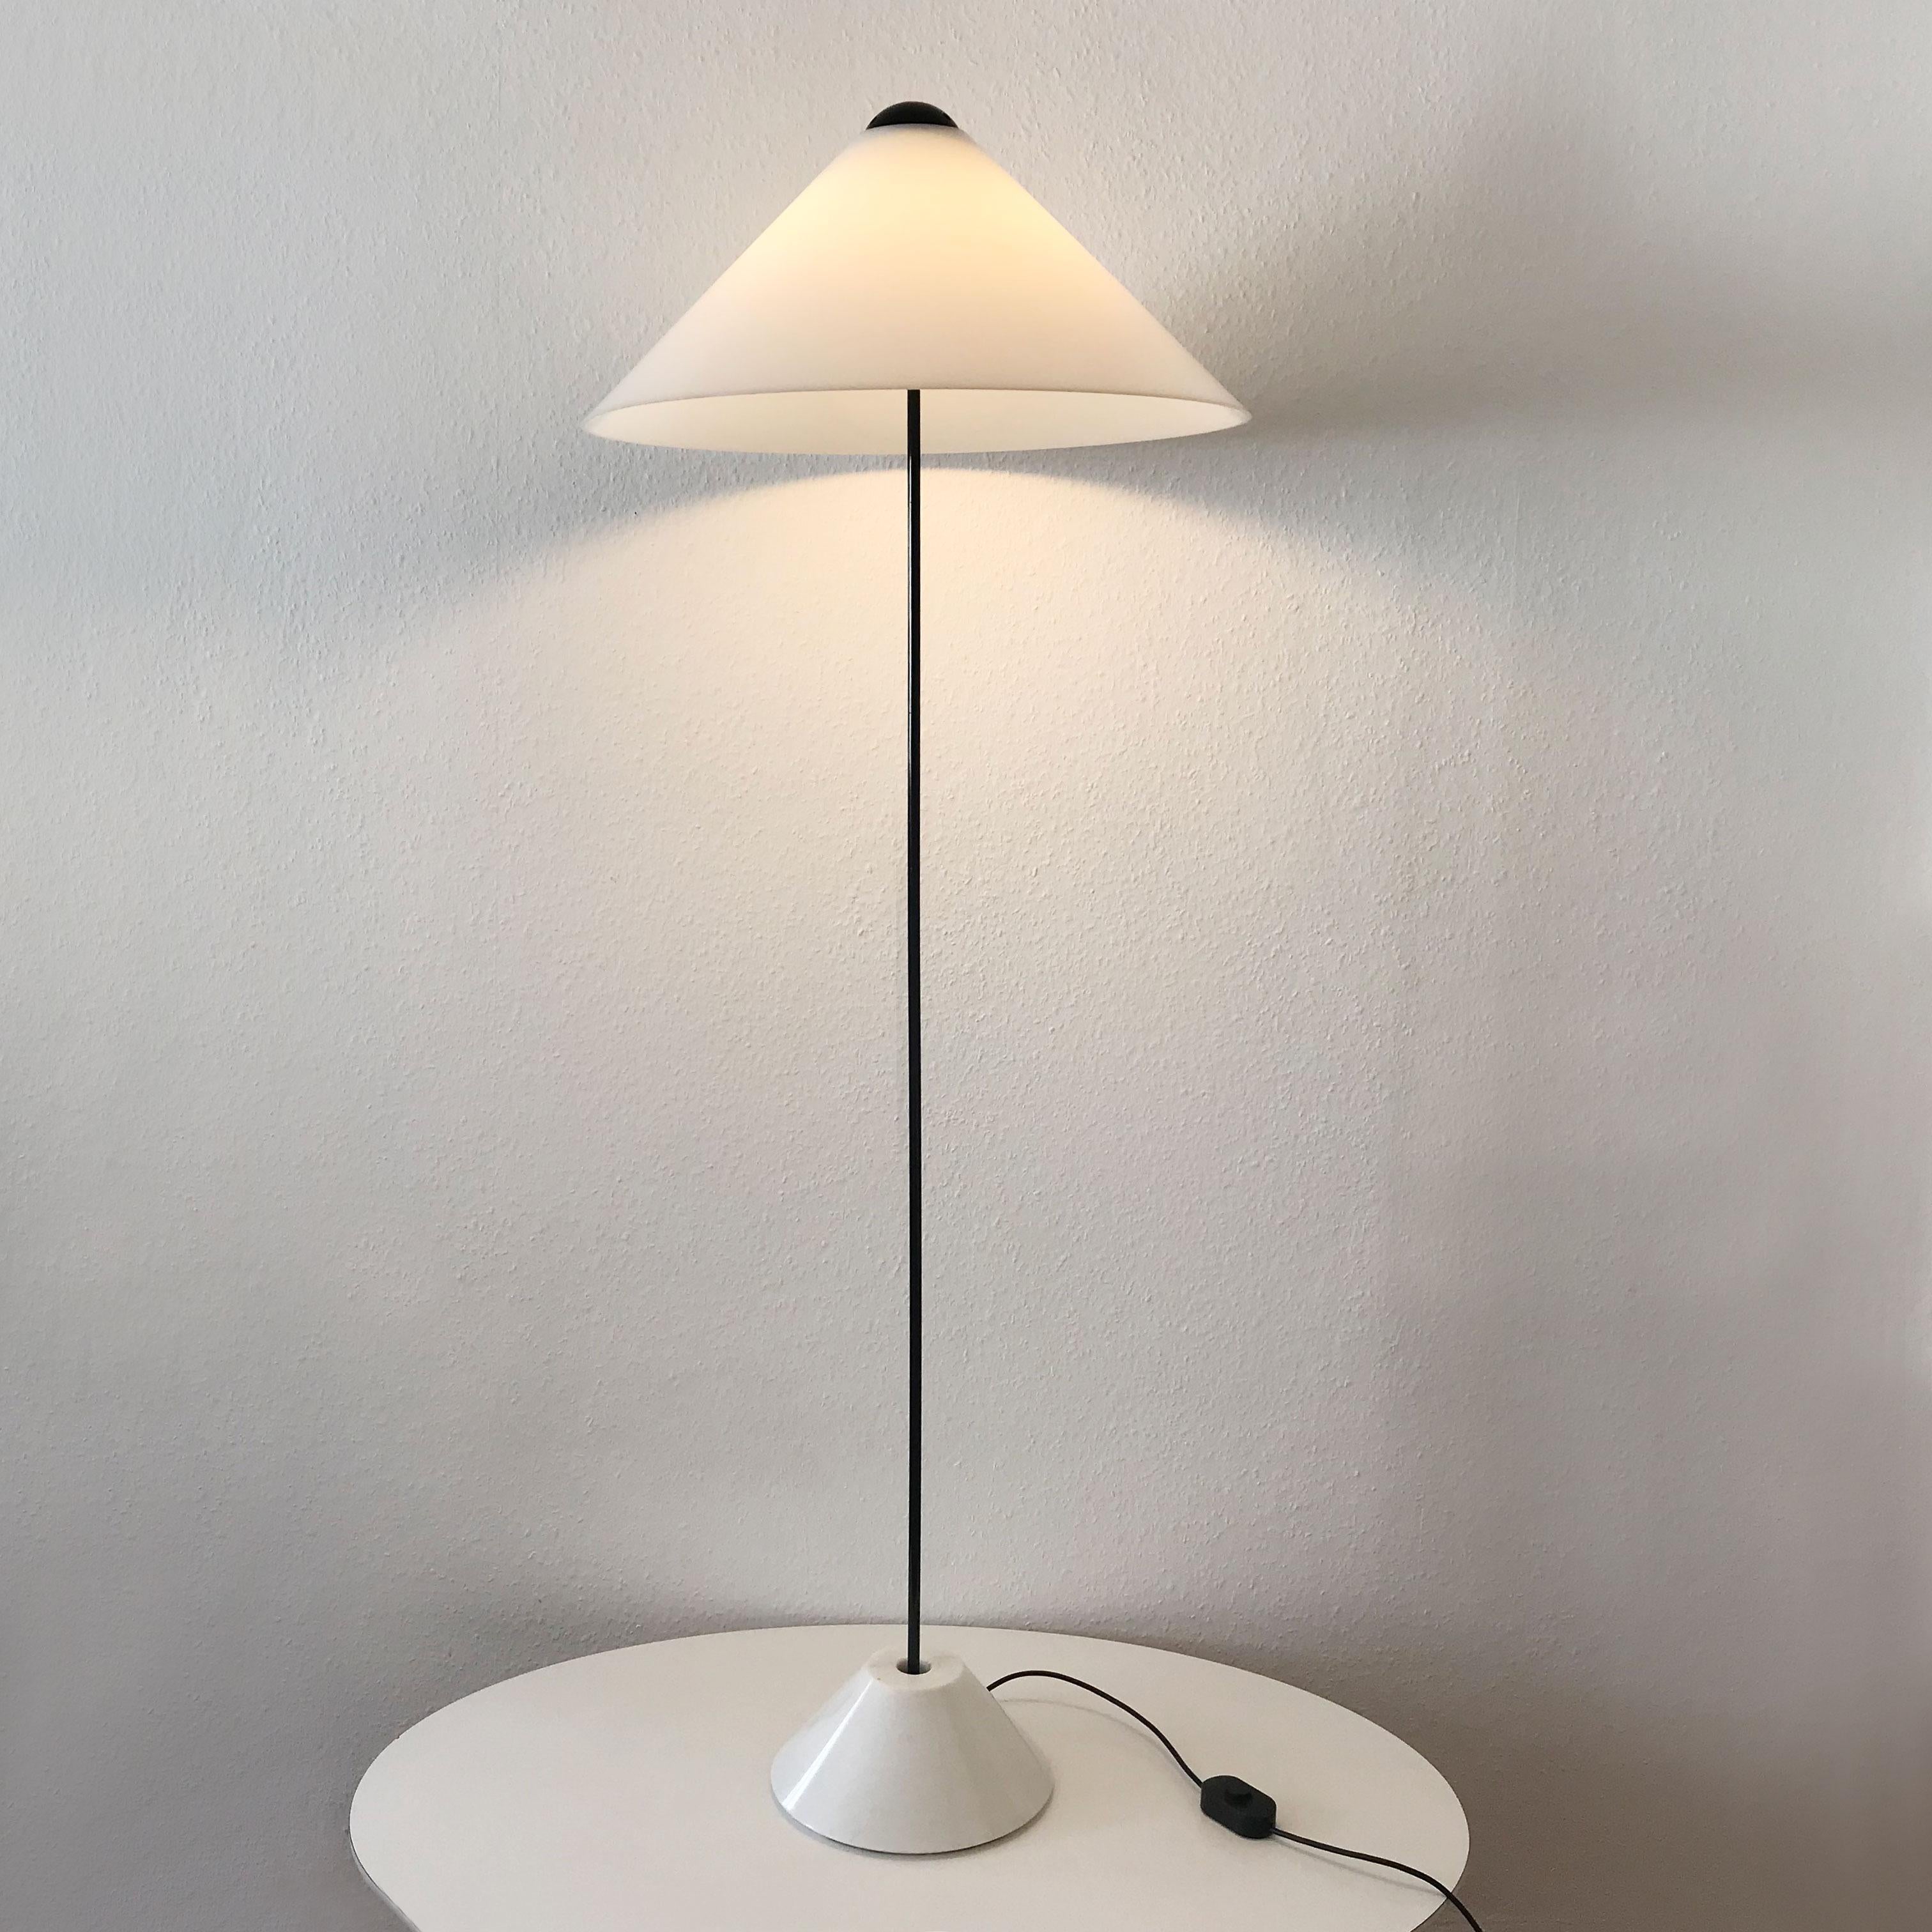 Exceptional Mid-Century Modern floor lamp Snow. Designed by the Italian designer Vico Magistretti, 1973 for O-Luce, Italy.

This elegant and extremely rare floor lamp is executed in steel stem, marble and acrylic shade. It needs 2 x E27 screw fit